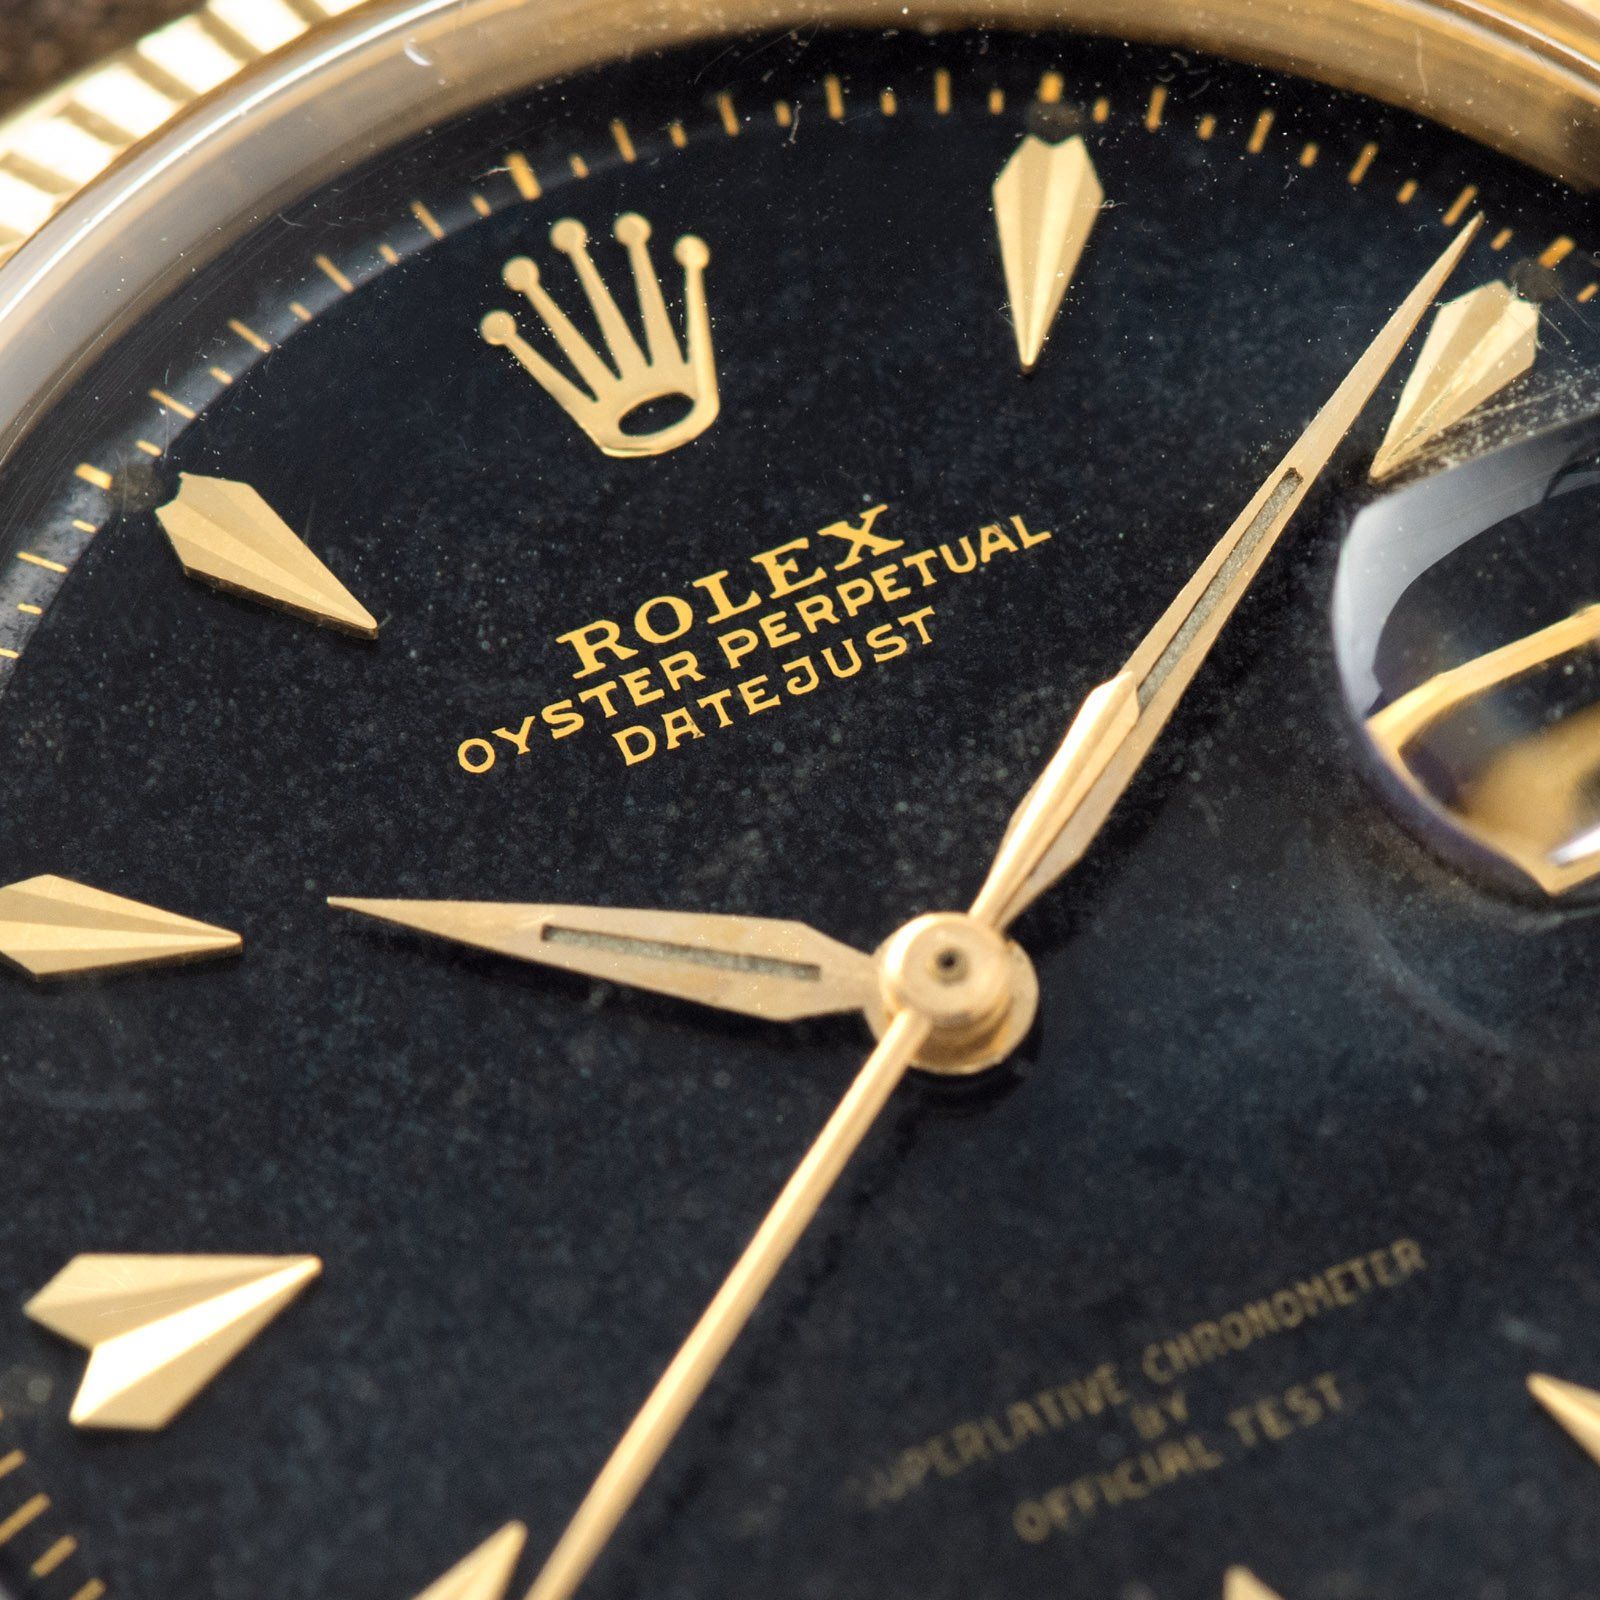 Rare Rolex Datejust ref 6605 Black Gilt Dial with 'OFFICIAL TEST' Text